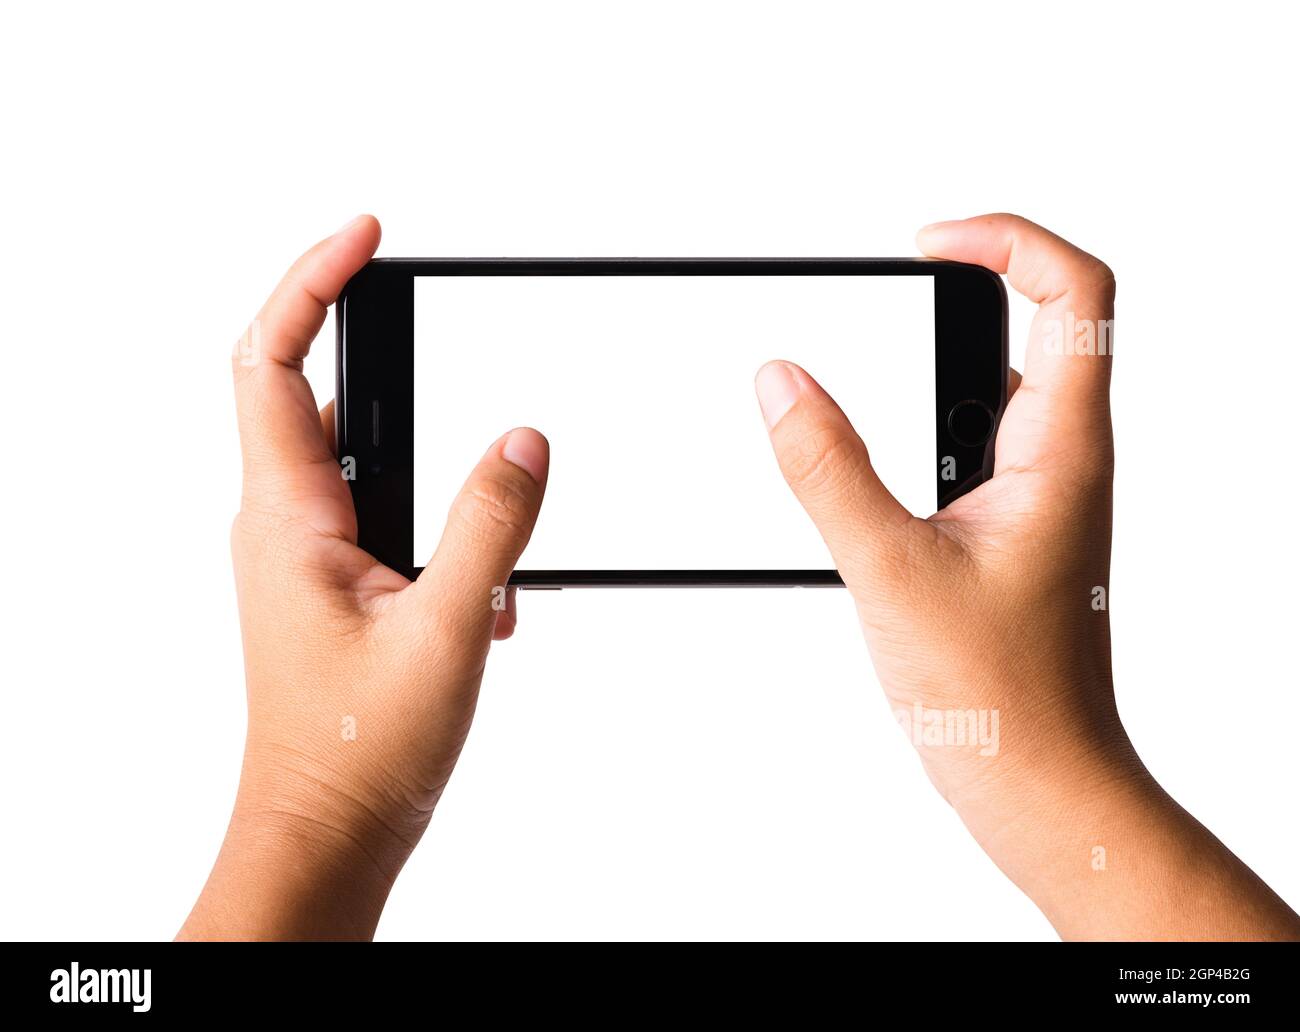 Woman hand playing game on smartphone blank screen. Female holding modern mobile phone horizontal position studio shot isolated on over white backgrou Stock Photo